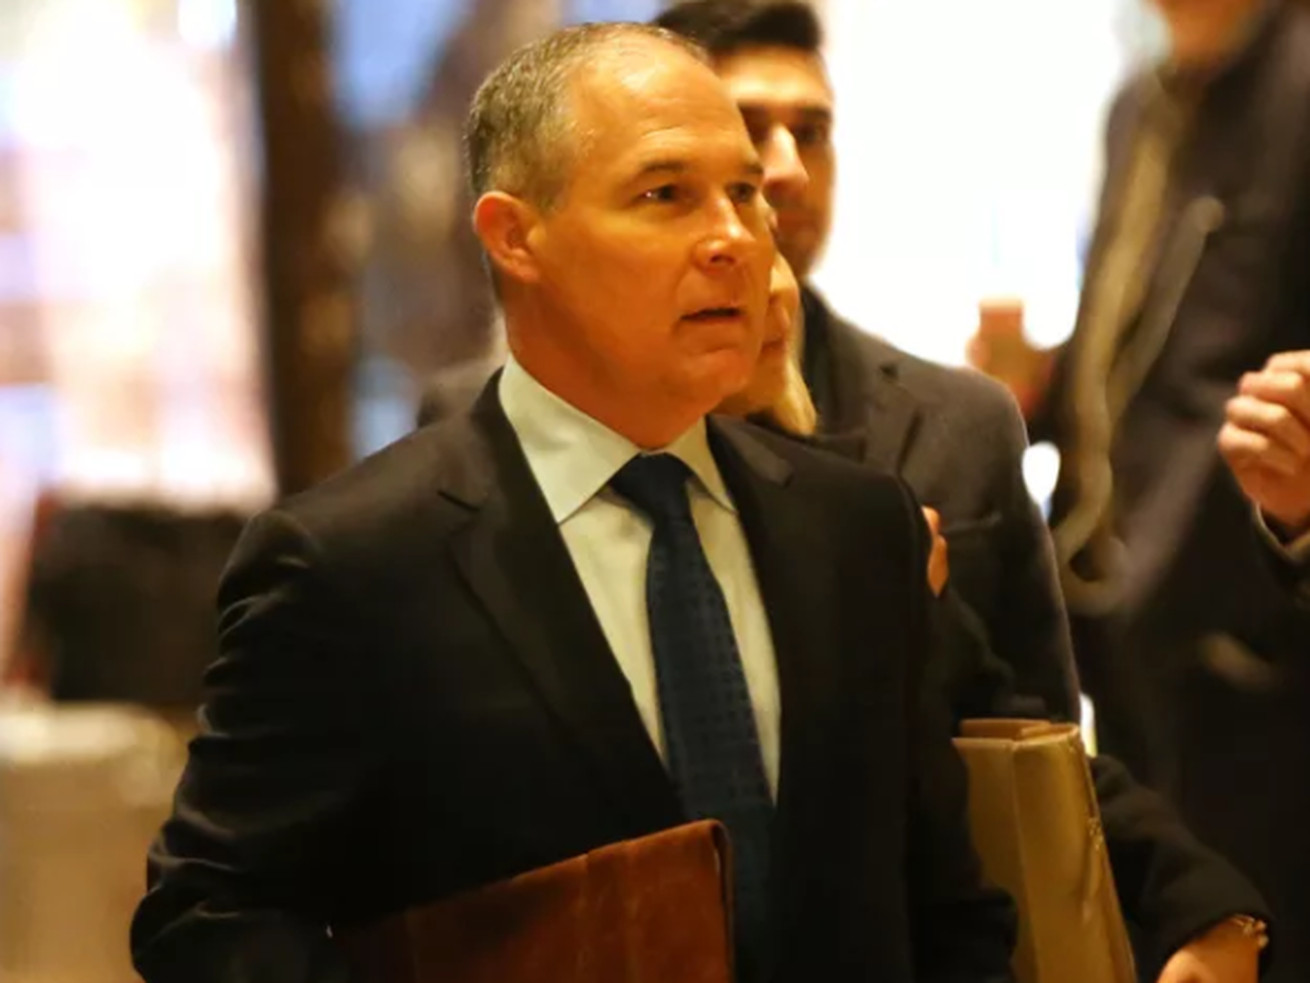 “The unrelenting attacks on me personally, my family, are unprecedented and have taken a sizable toll on all of us,” Scott Pruitt wrote in his resignation letter.